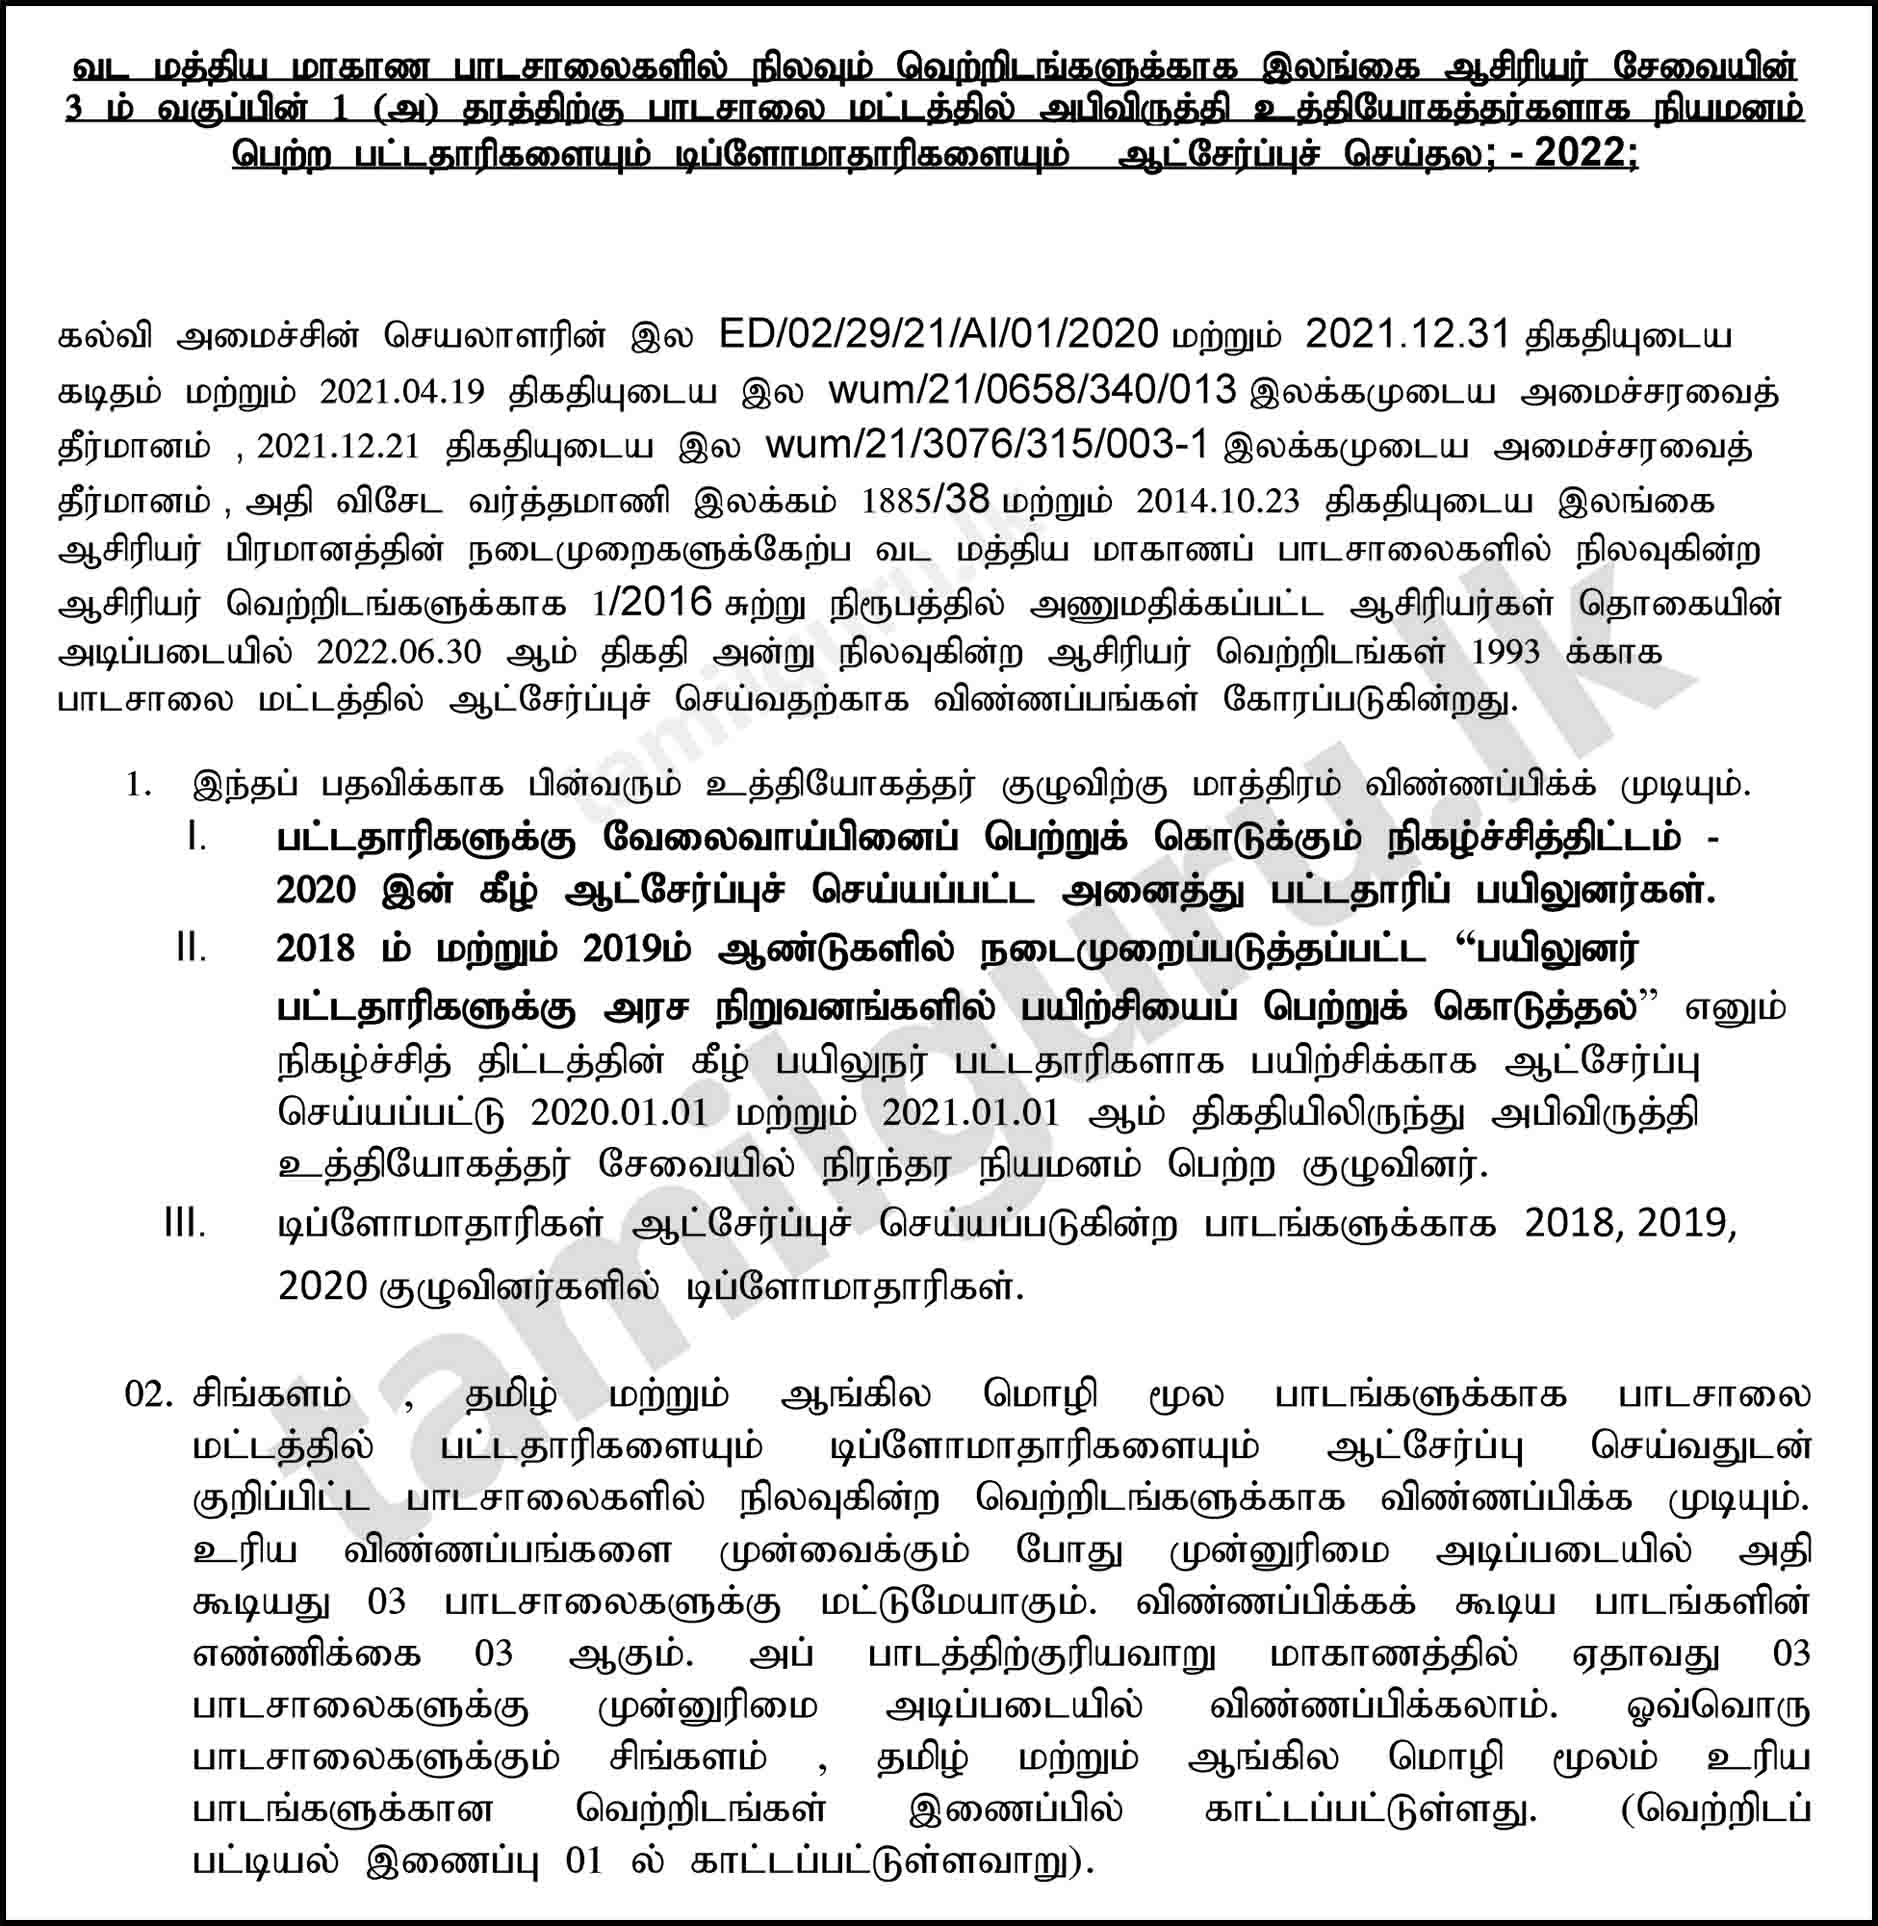 North Central Province Graduate Teaching Vacancies (2022) (Details in Tamil)